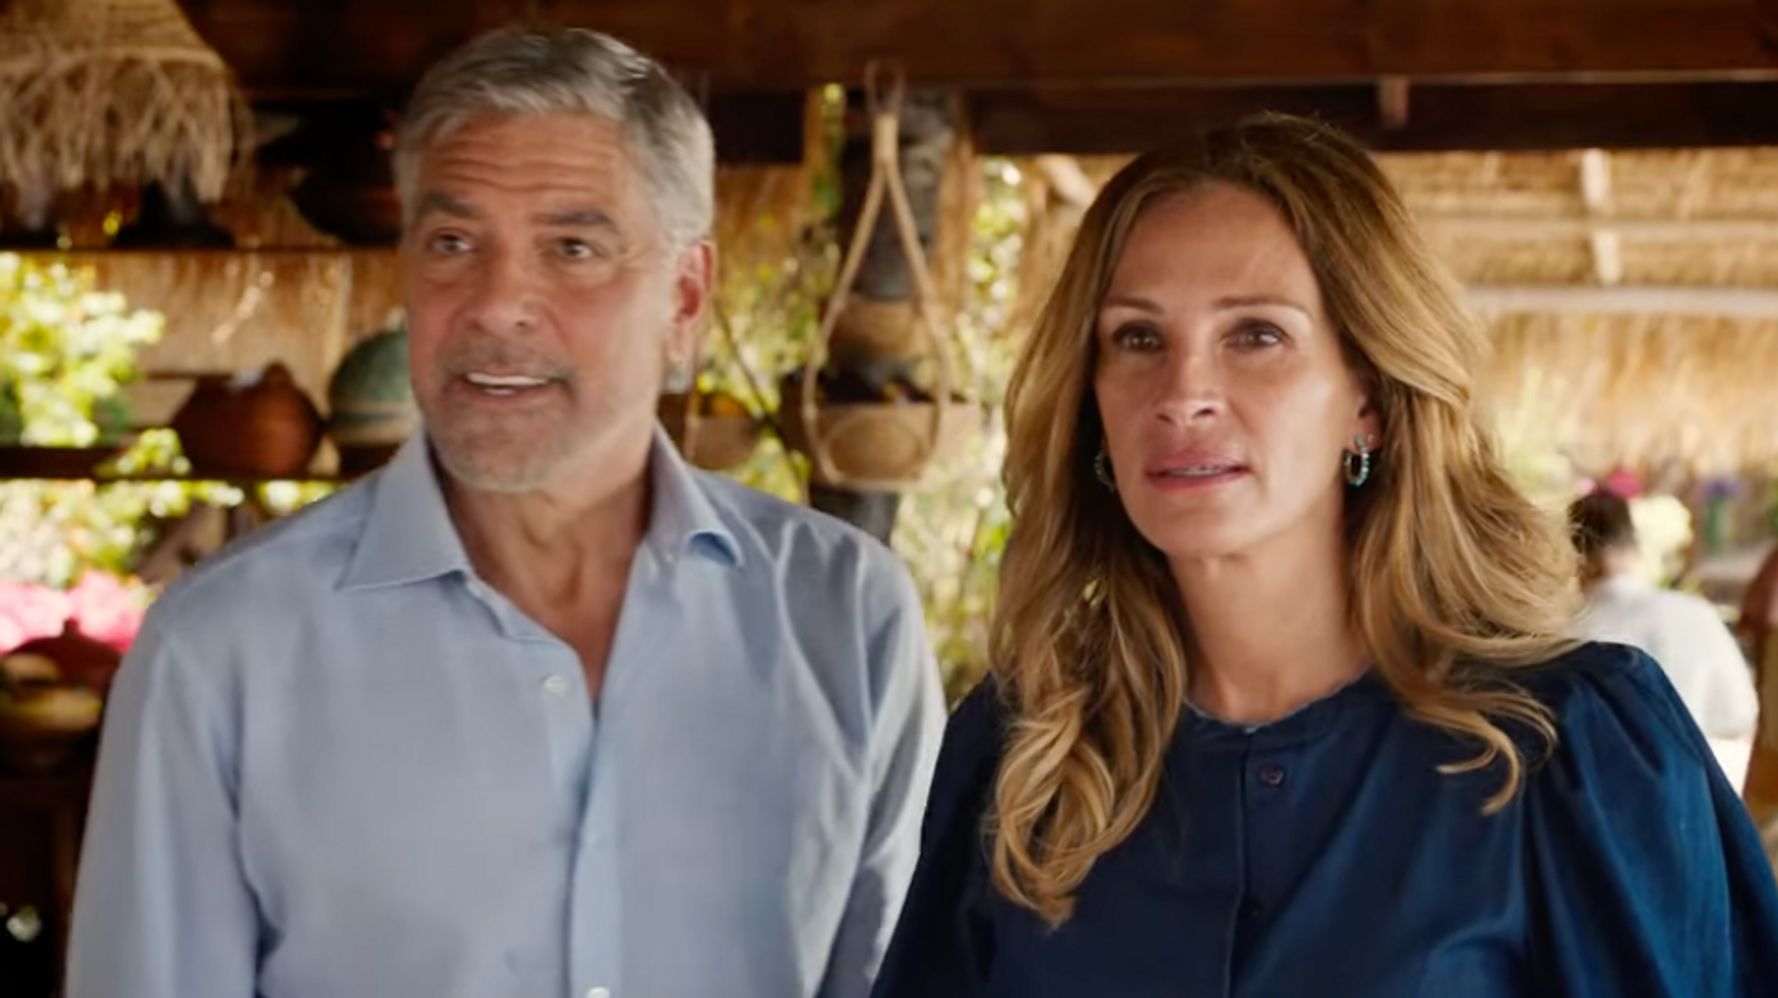 https://www.huffpost.com/entry/julia-roberts-george-clooney-ticket-to-paradise-trailer_n_62bc78d0e4b05653163b9063 